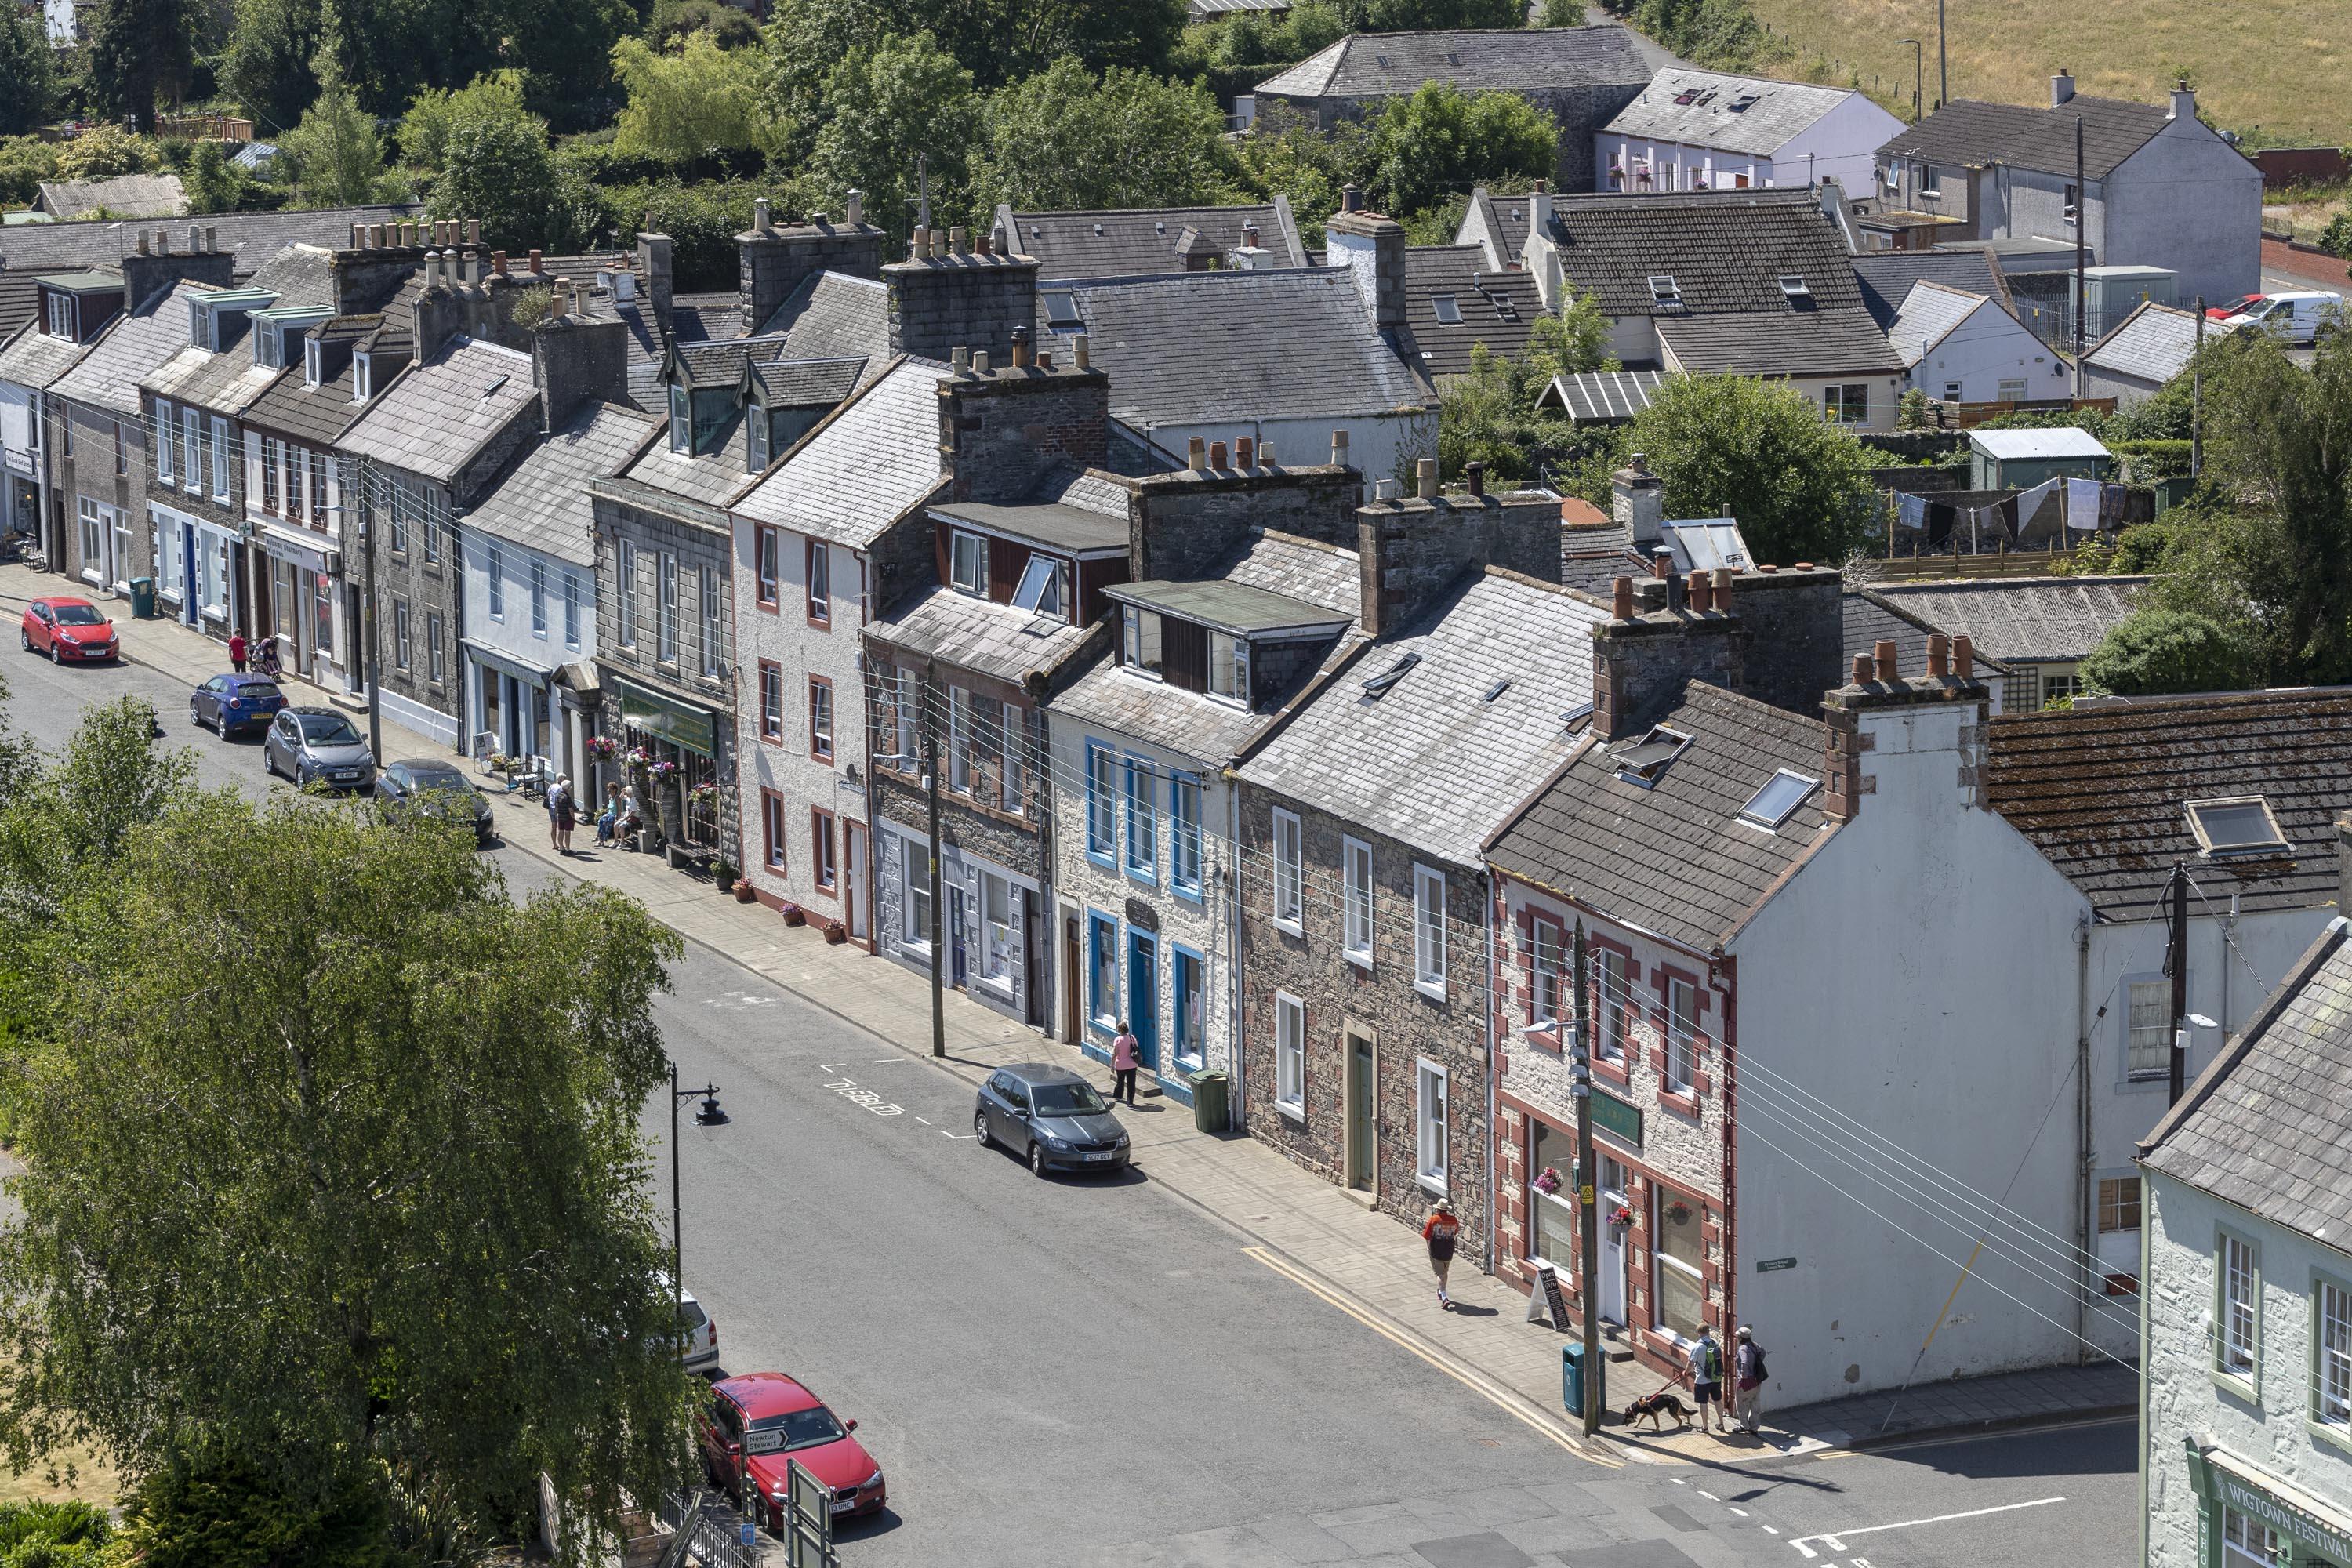 An aerial view of North Main Street, Wigtown, Scotland's National Book Town. Terraced houses and shops in various colours, trees in the forefront.